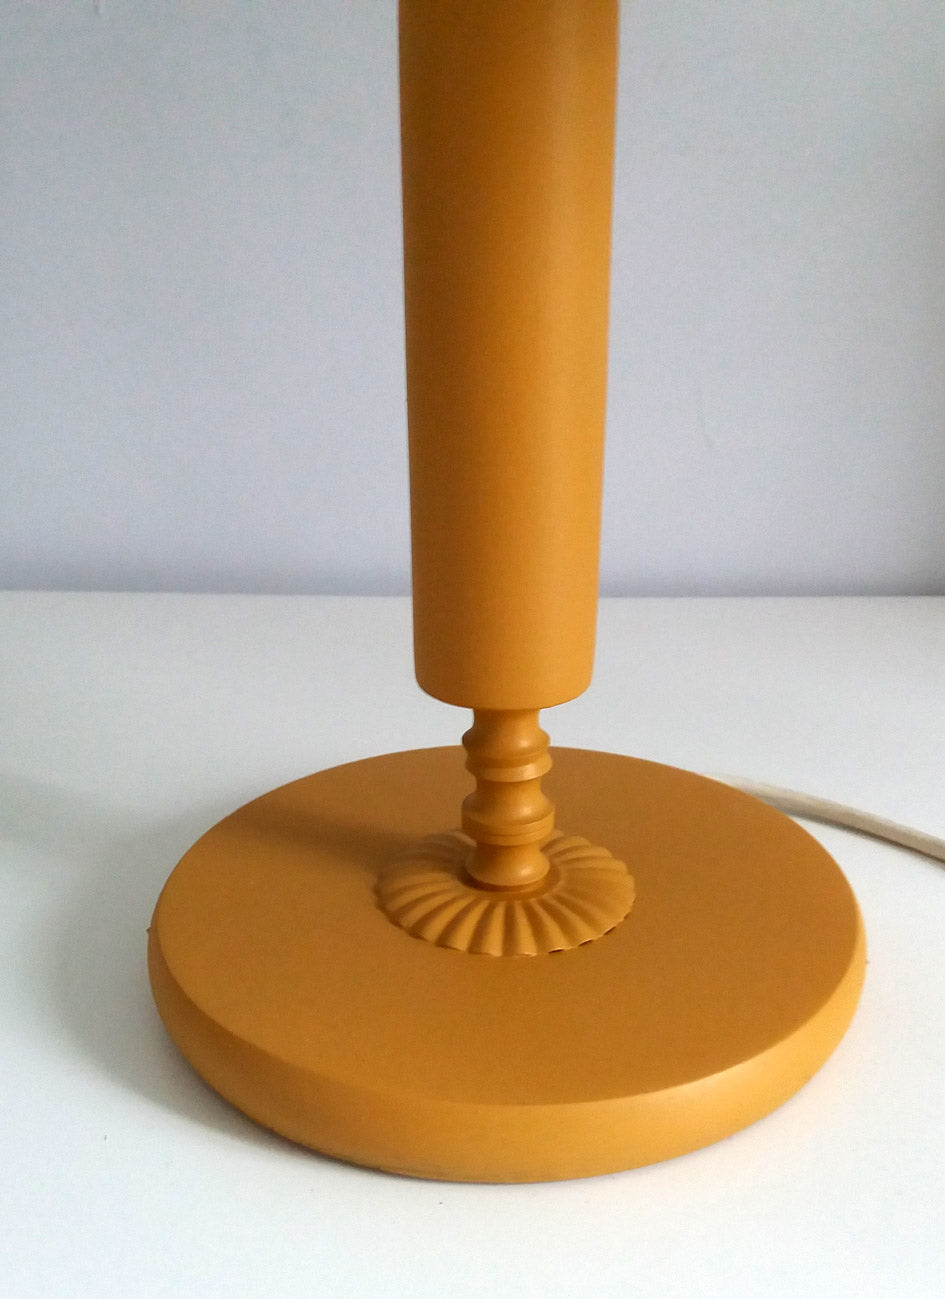 Vintage lamp base updated with fusion mineral paint in Mustard Yellow